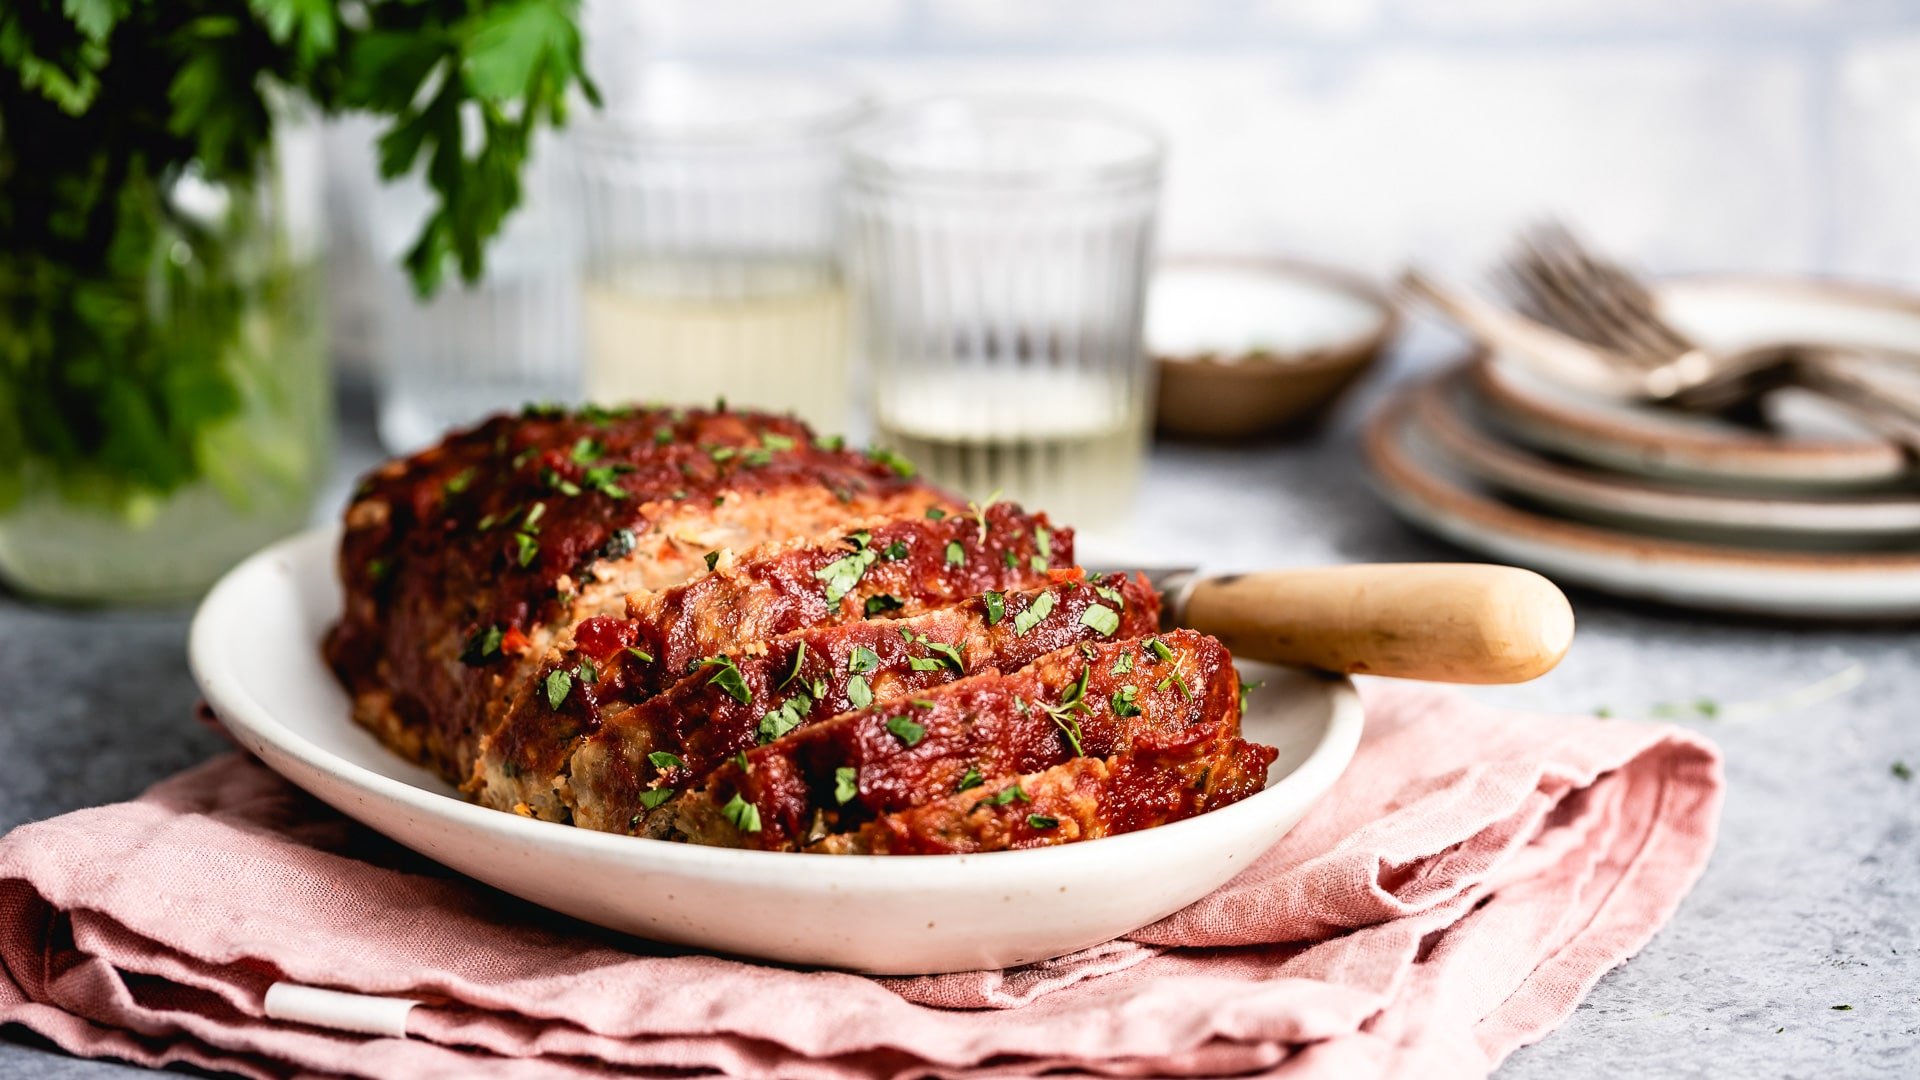 Easy Ground Turkey Meatloaf - Healthy Fitness Meals